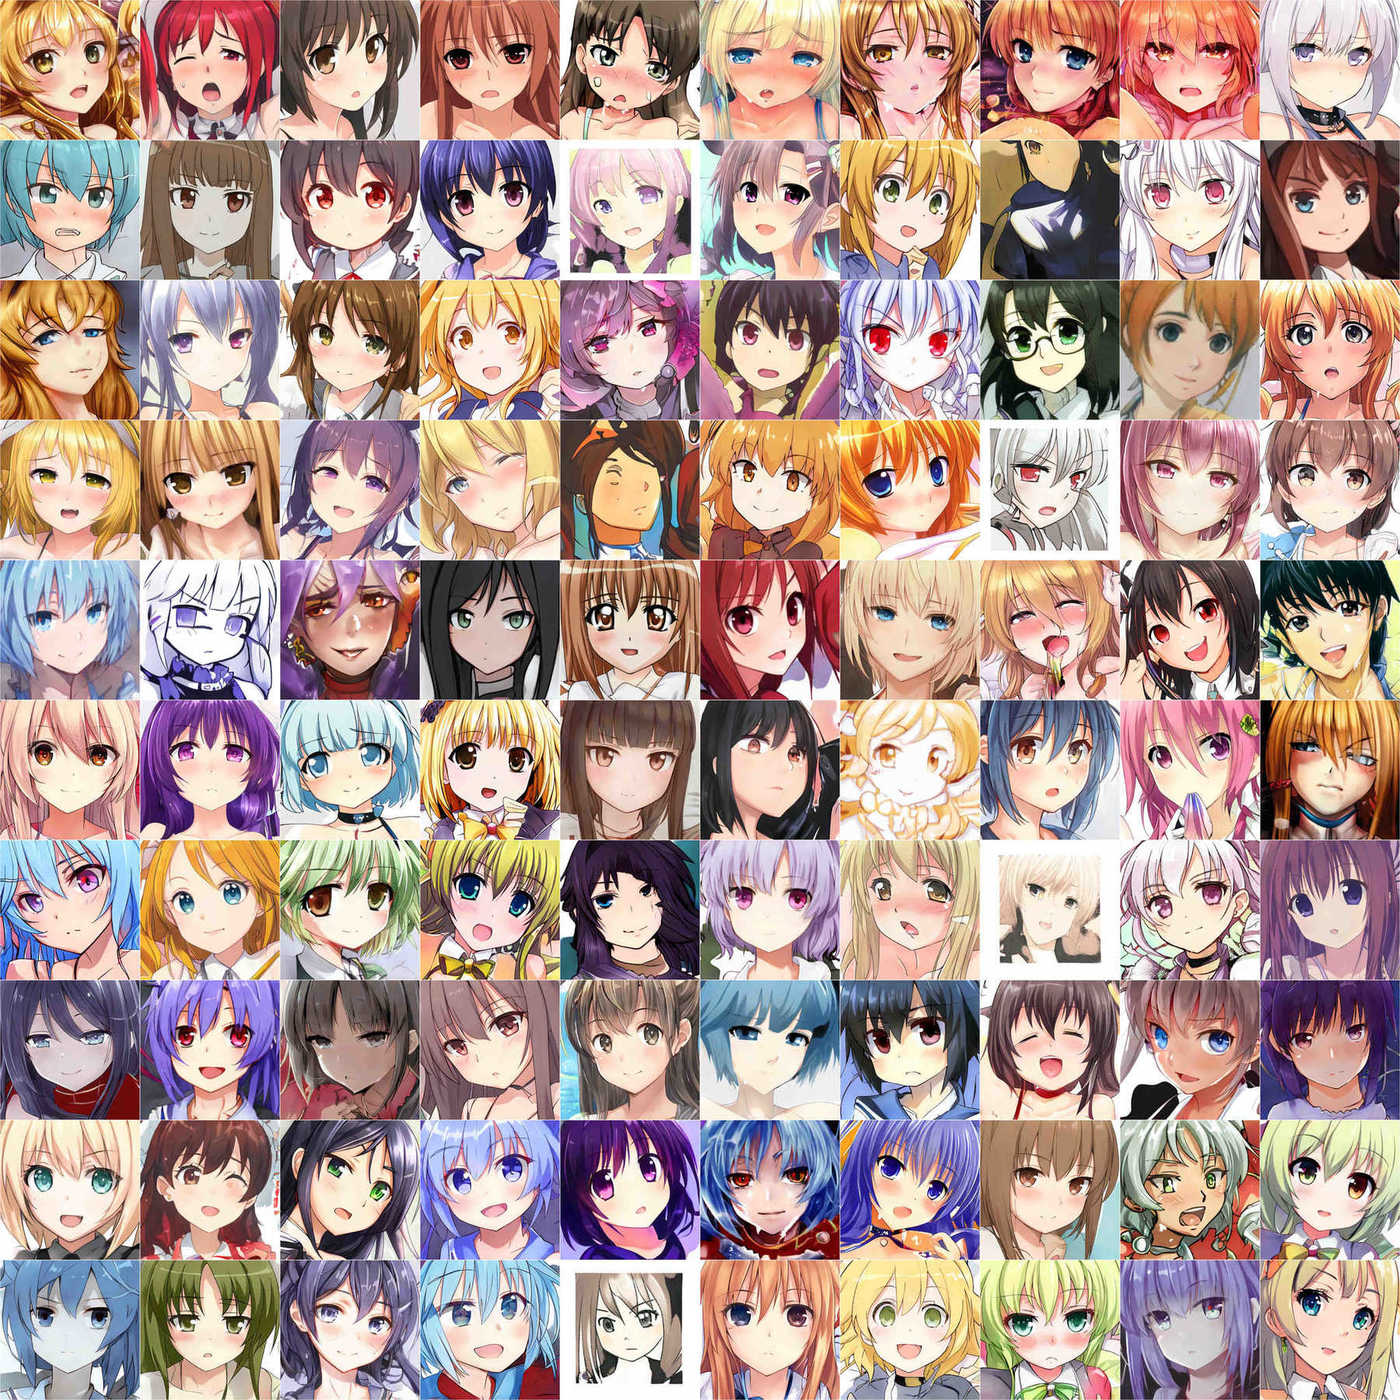 100 random sample images from the StyleGAN anime faces on TWDNE, arranged in a 10×10 grid.